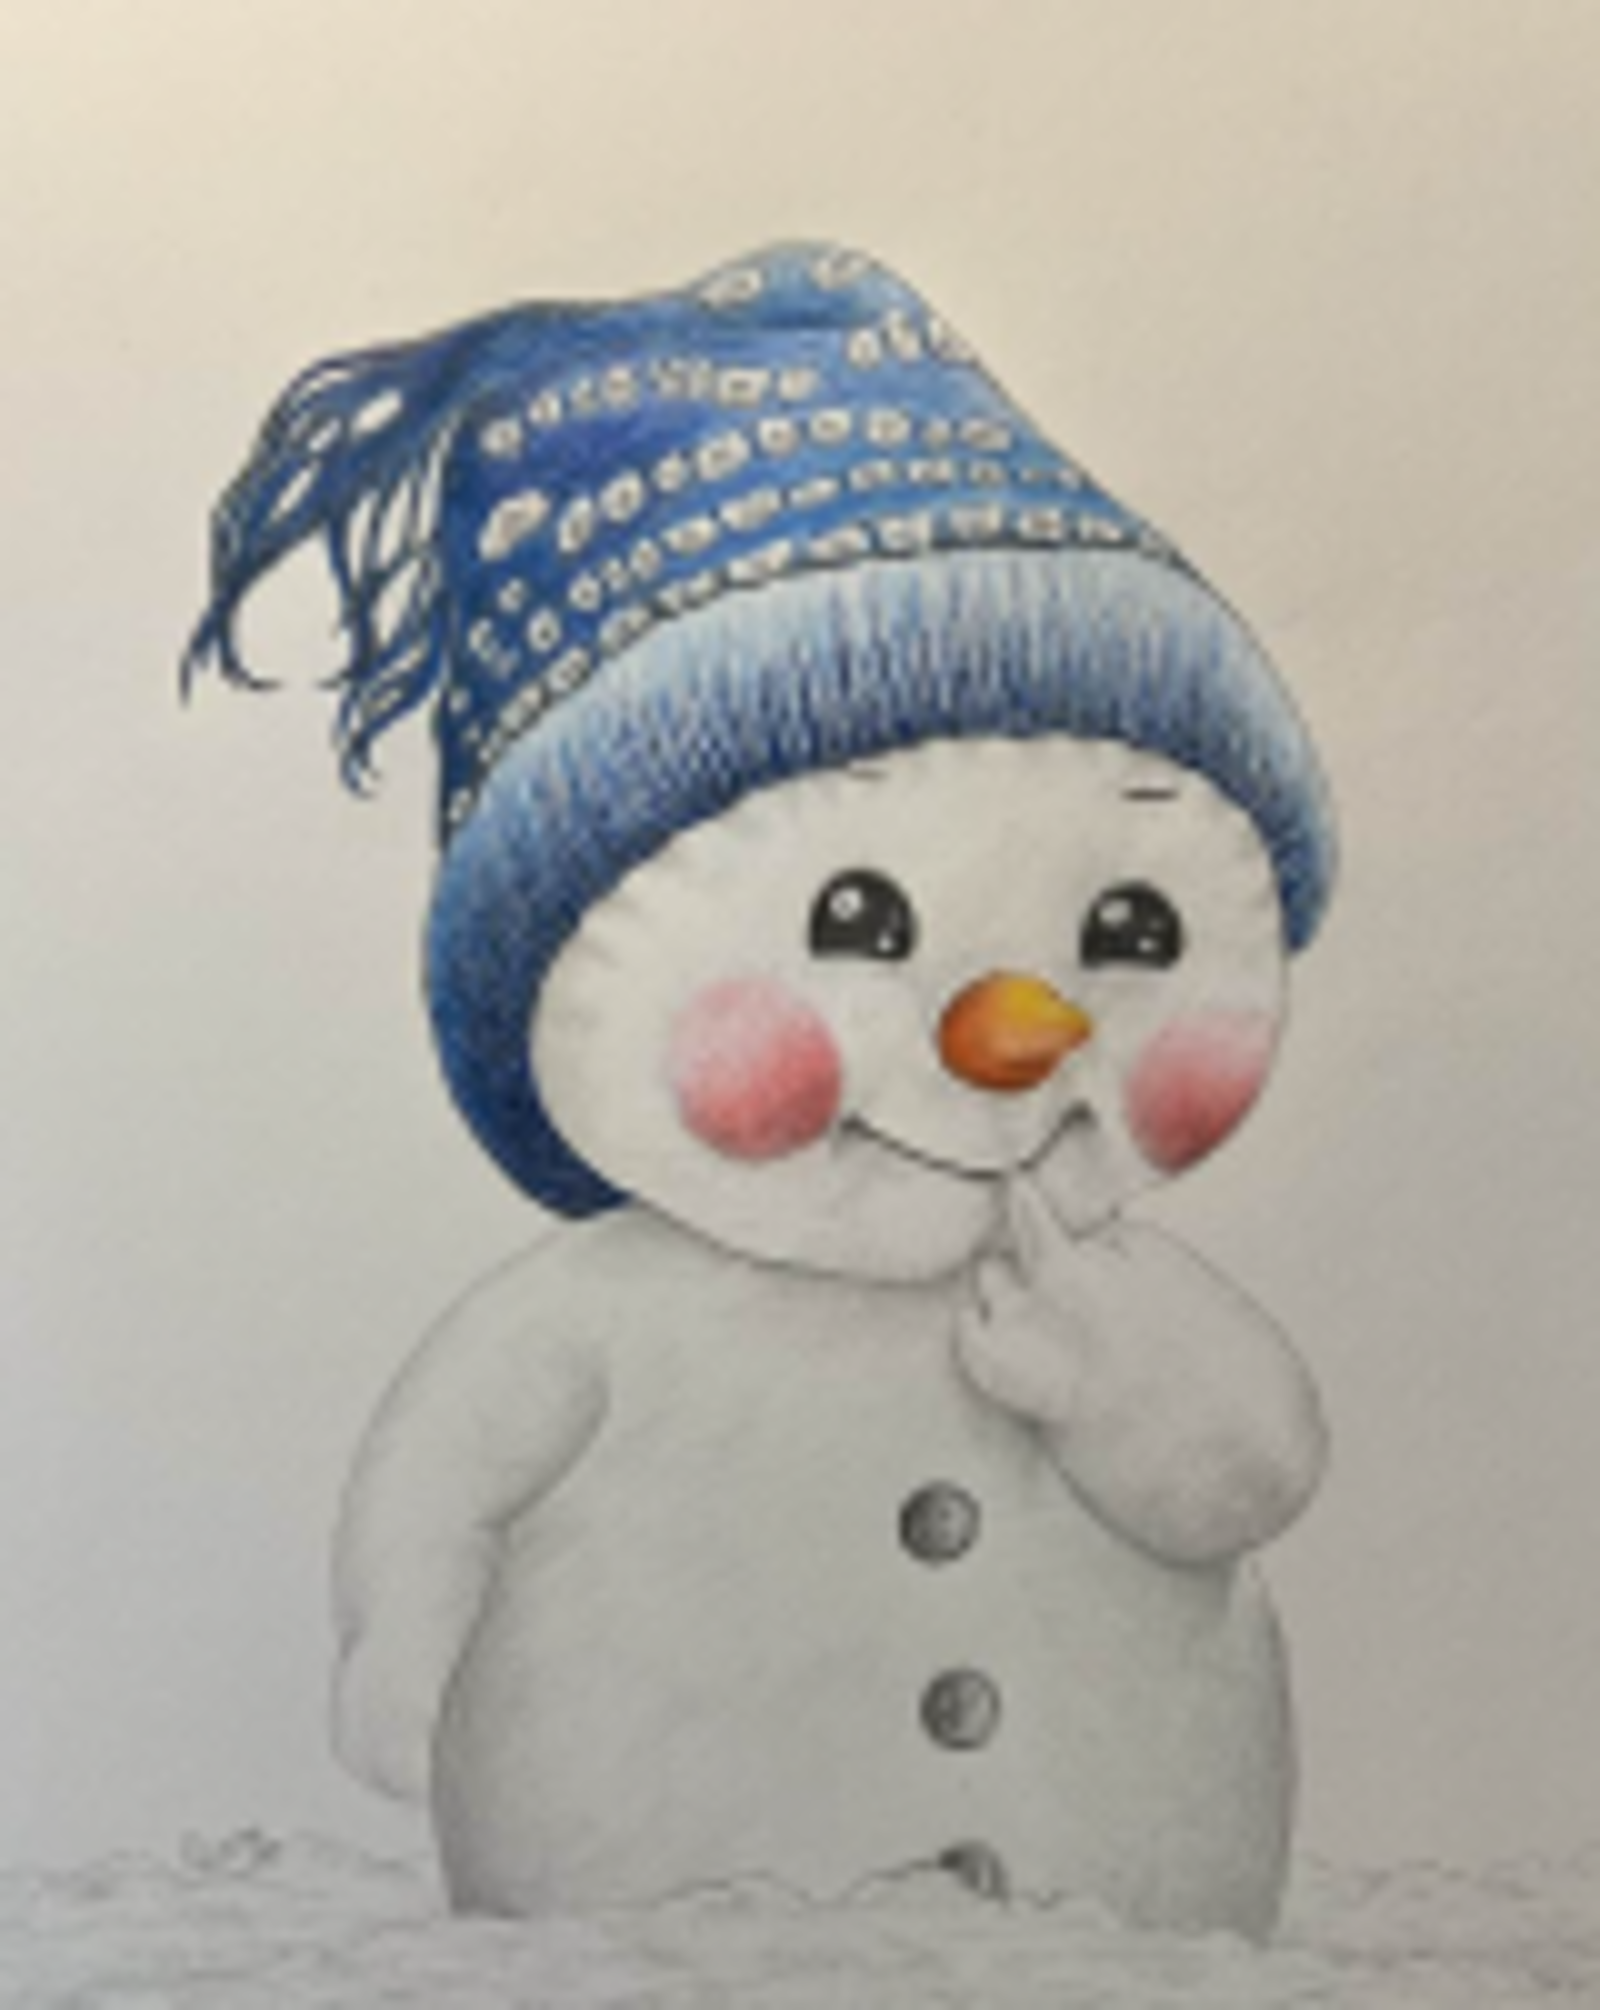 Chris' Creations Snowman Painting